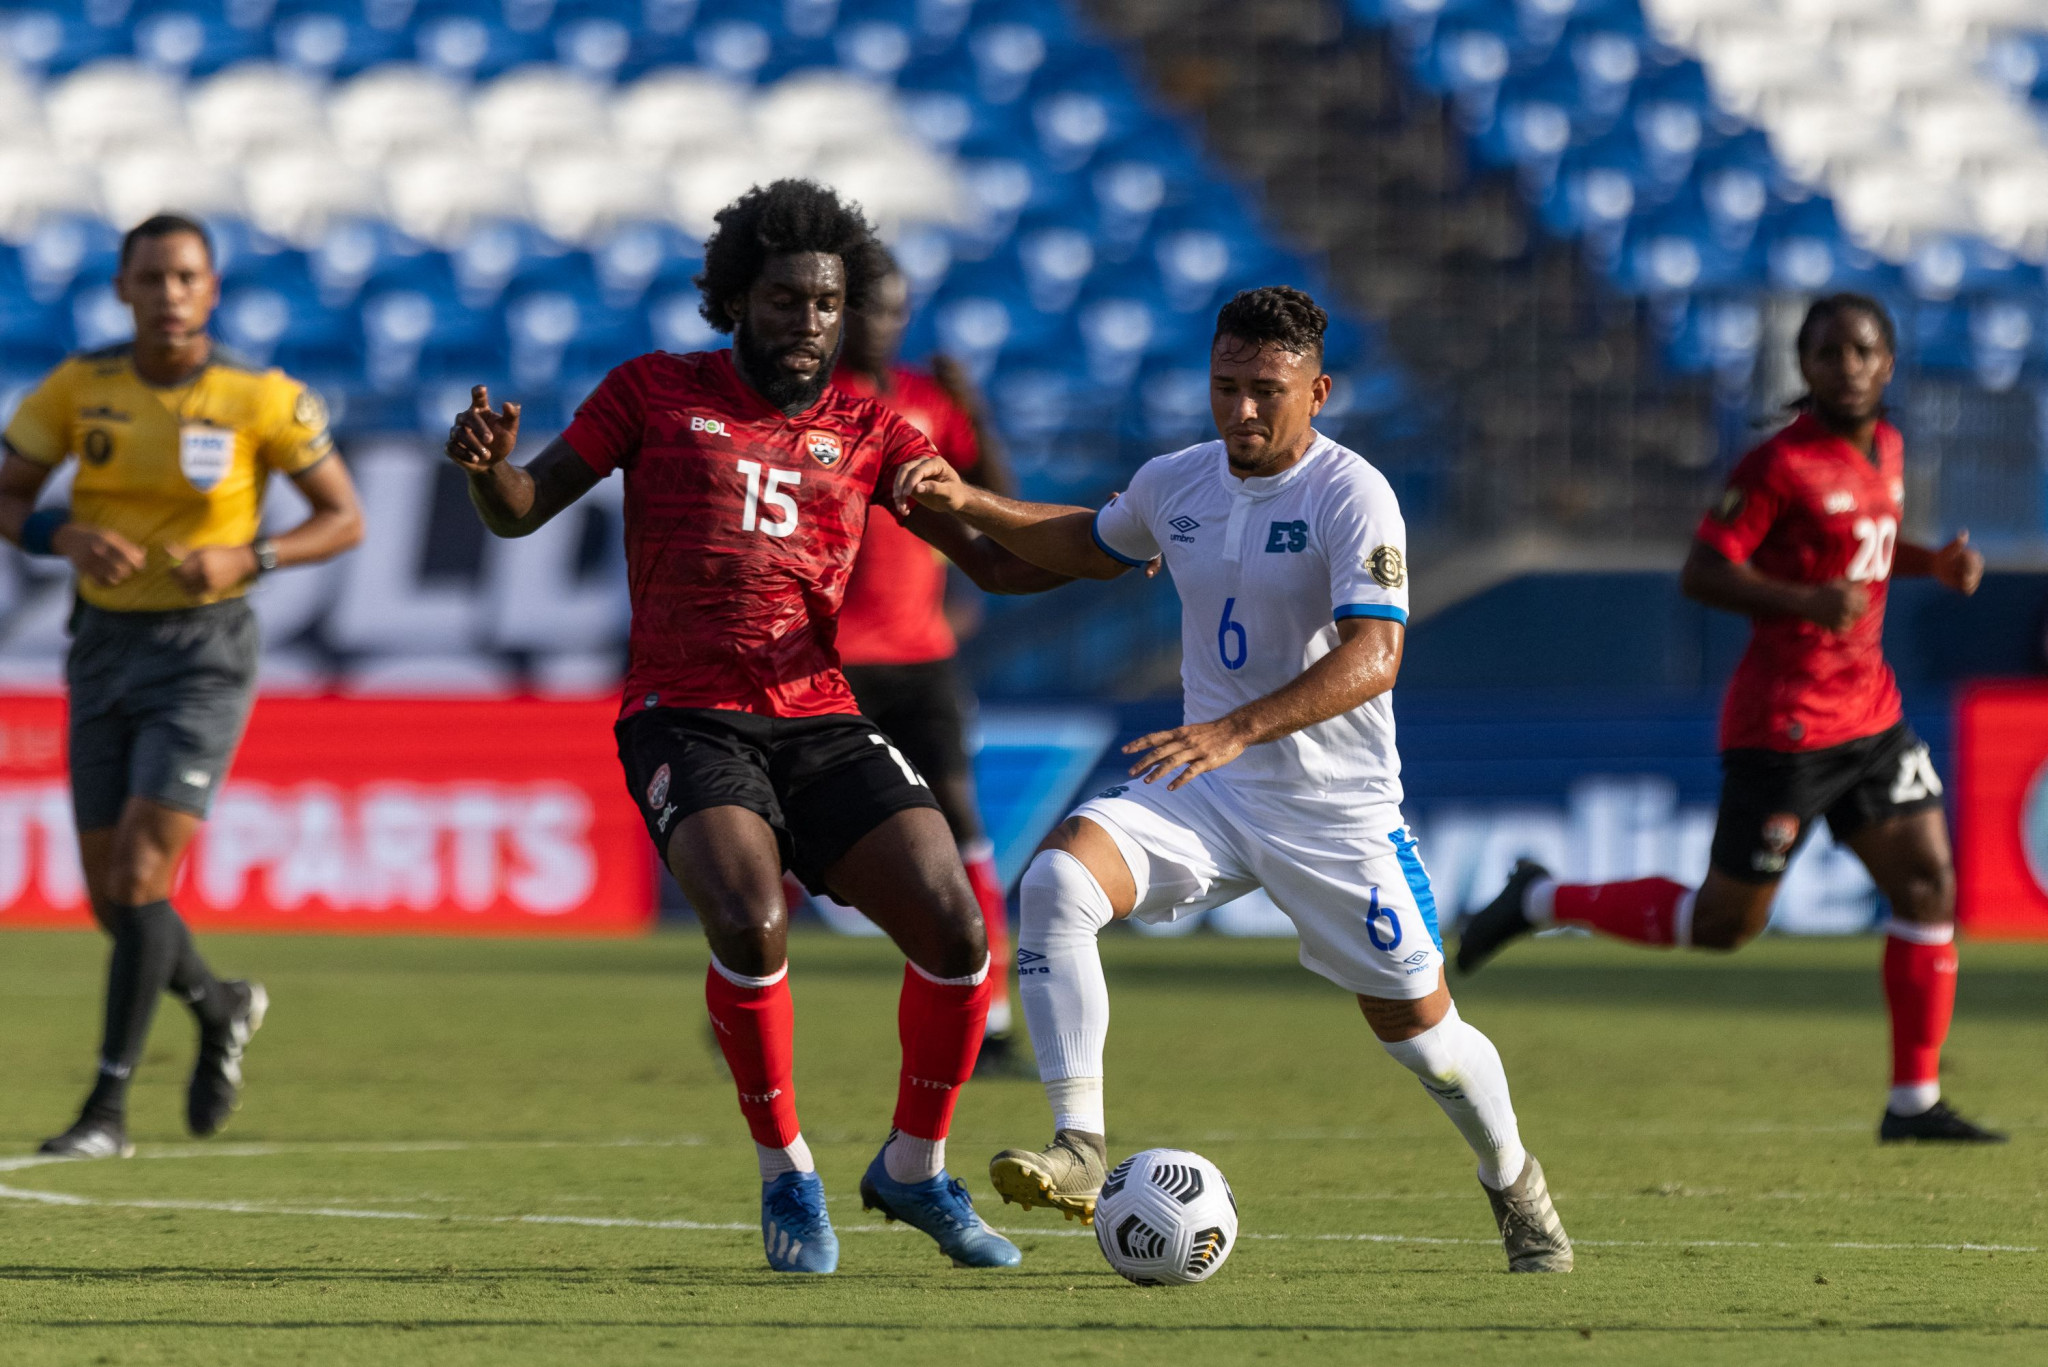 El Salvador clinch place in Gold Cup knockout stage by beating Trinidad and Tobago